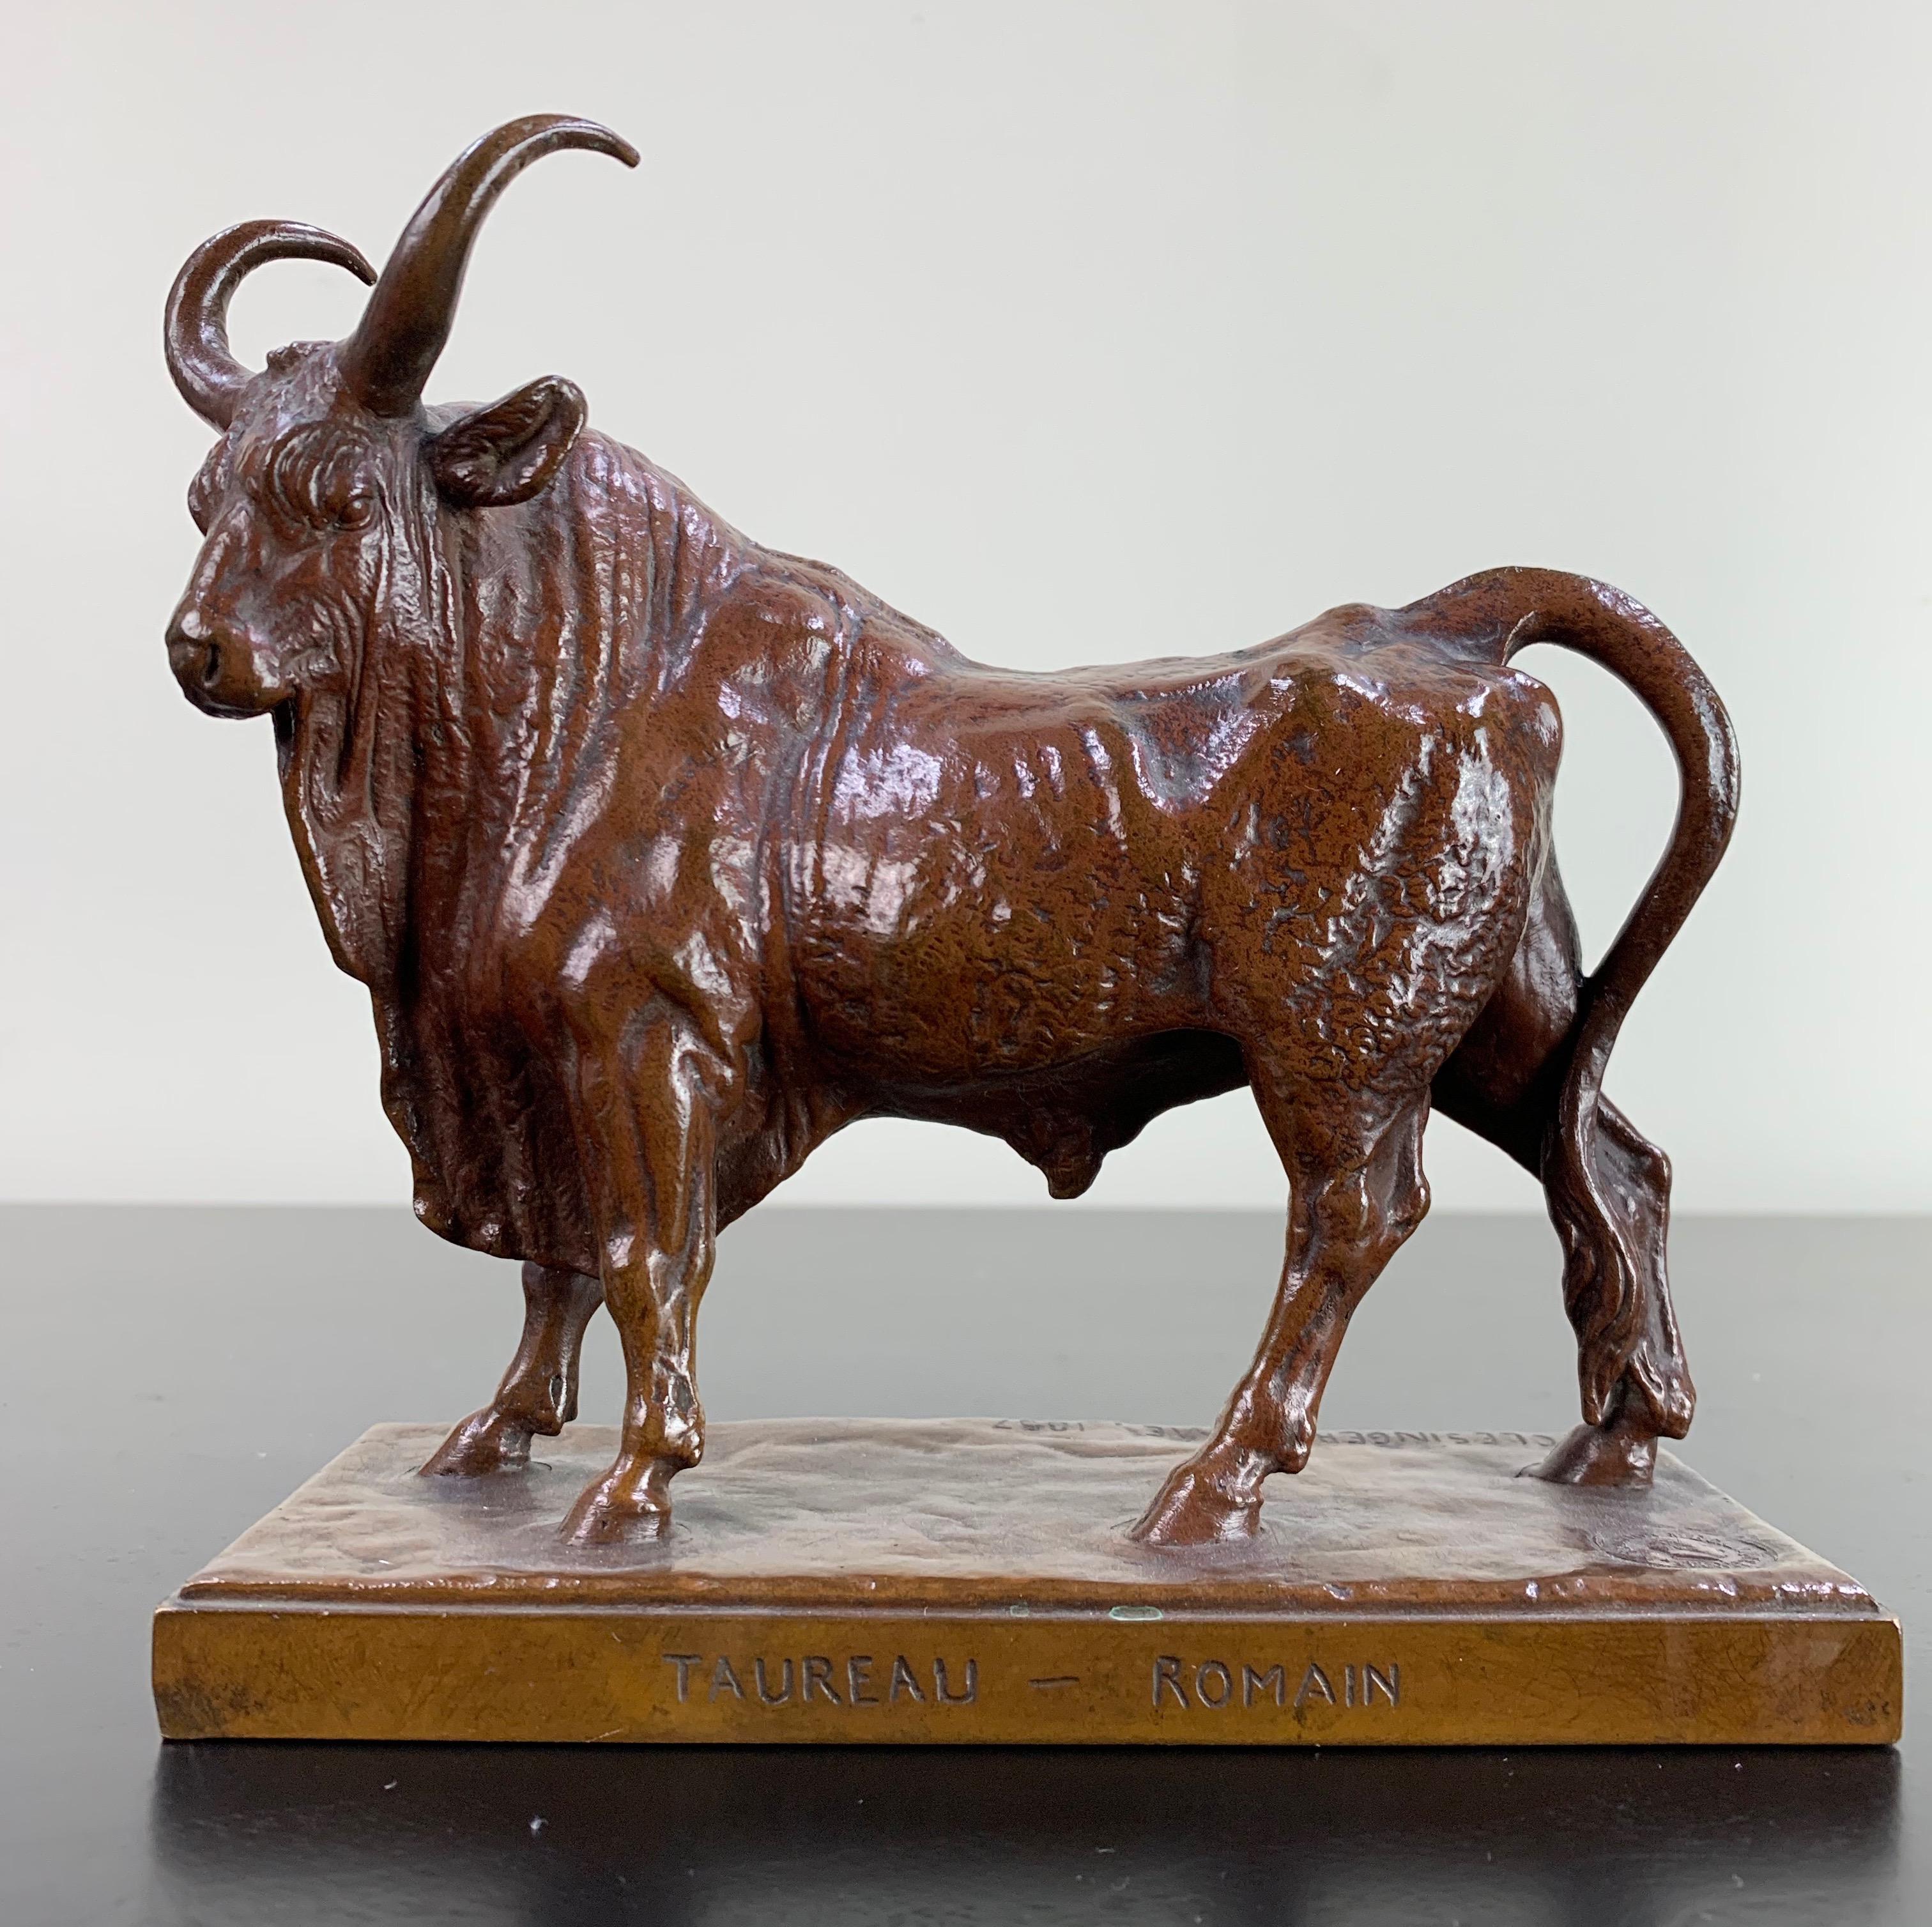 An amazing piece French bronze model of a bull, Jean Baptiste Clesinger. This piece is truly a beautiful work of art from the 19th century.

Auguste Clésinger
1814-1883
French
Taureau Romain signed: J. Clesinger inscribed by the founders 'F.